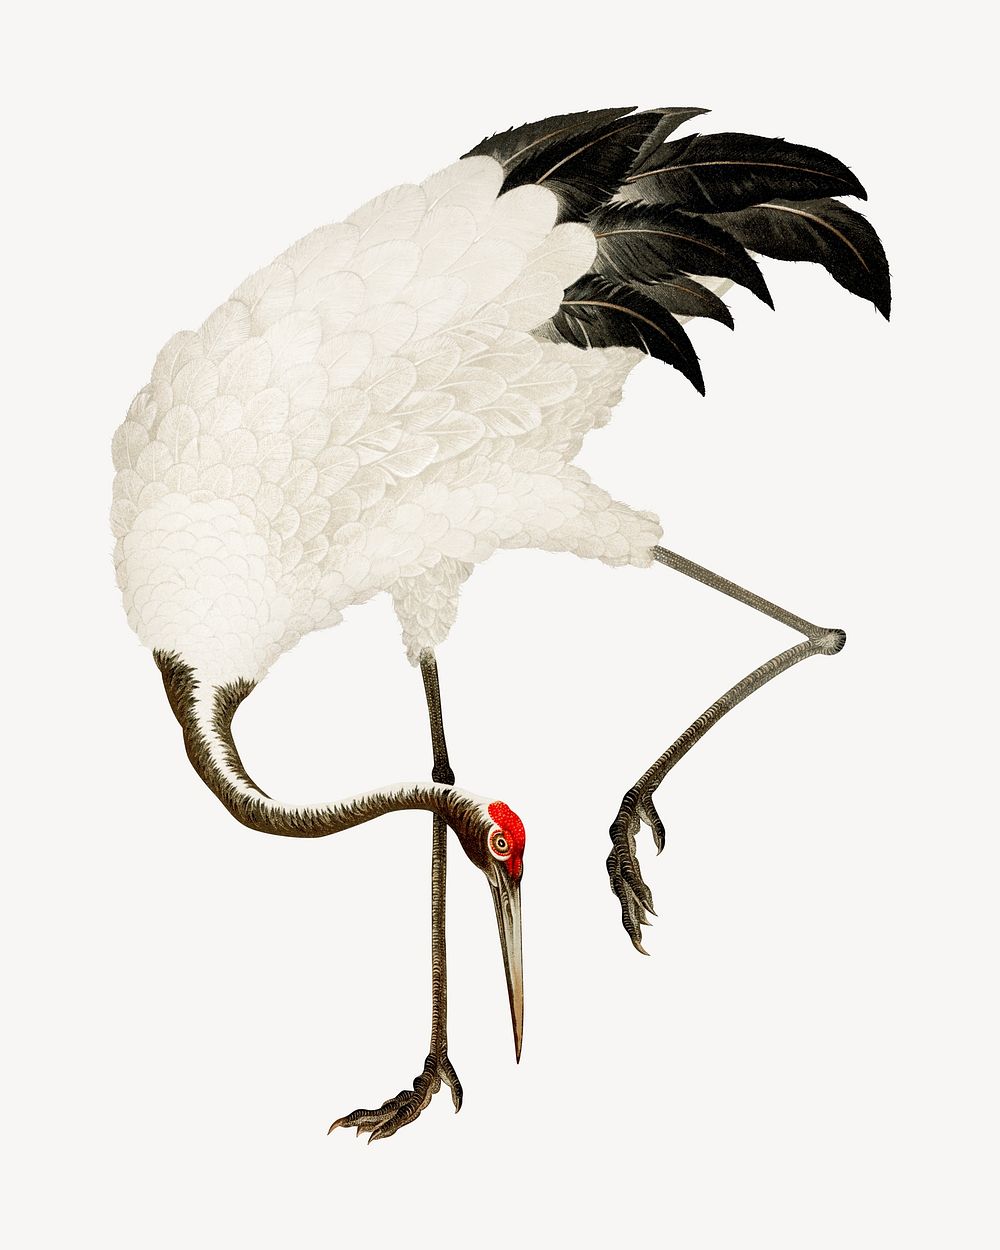 Sarus crane bird, vintage animal painting, by G.A. Audsley-Japanese illustration. Remixed by rawpixel.